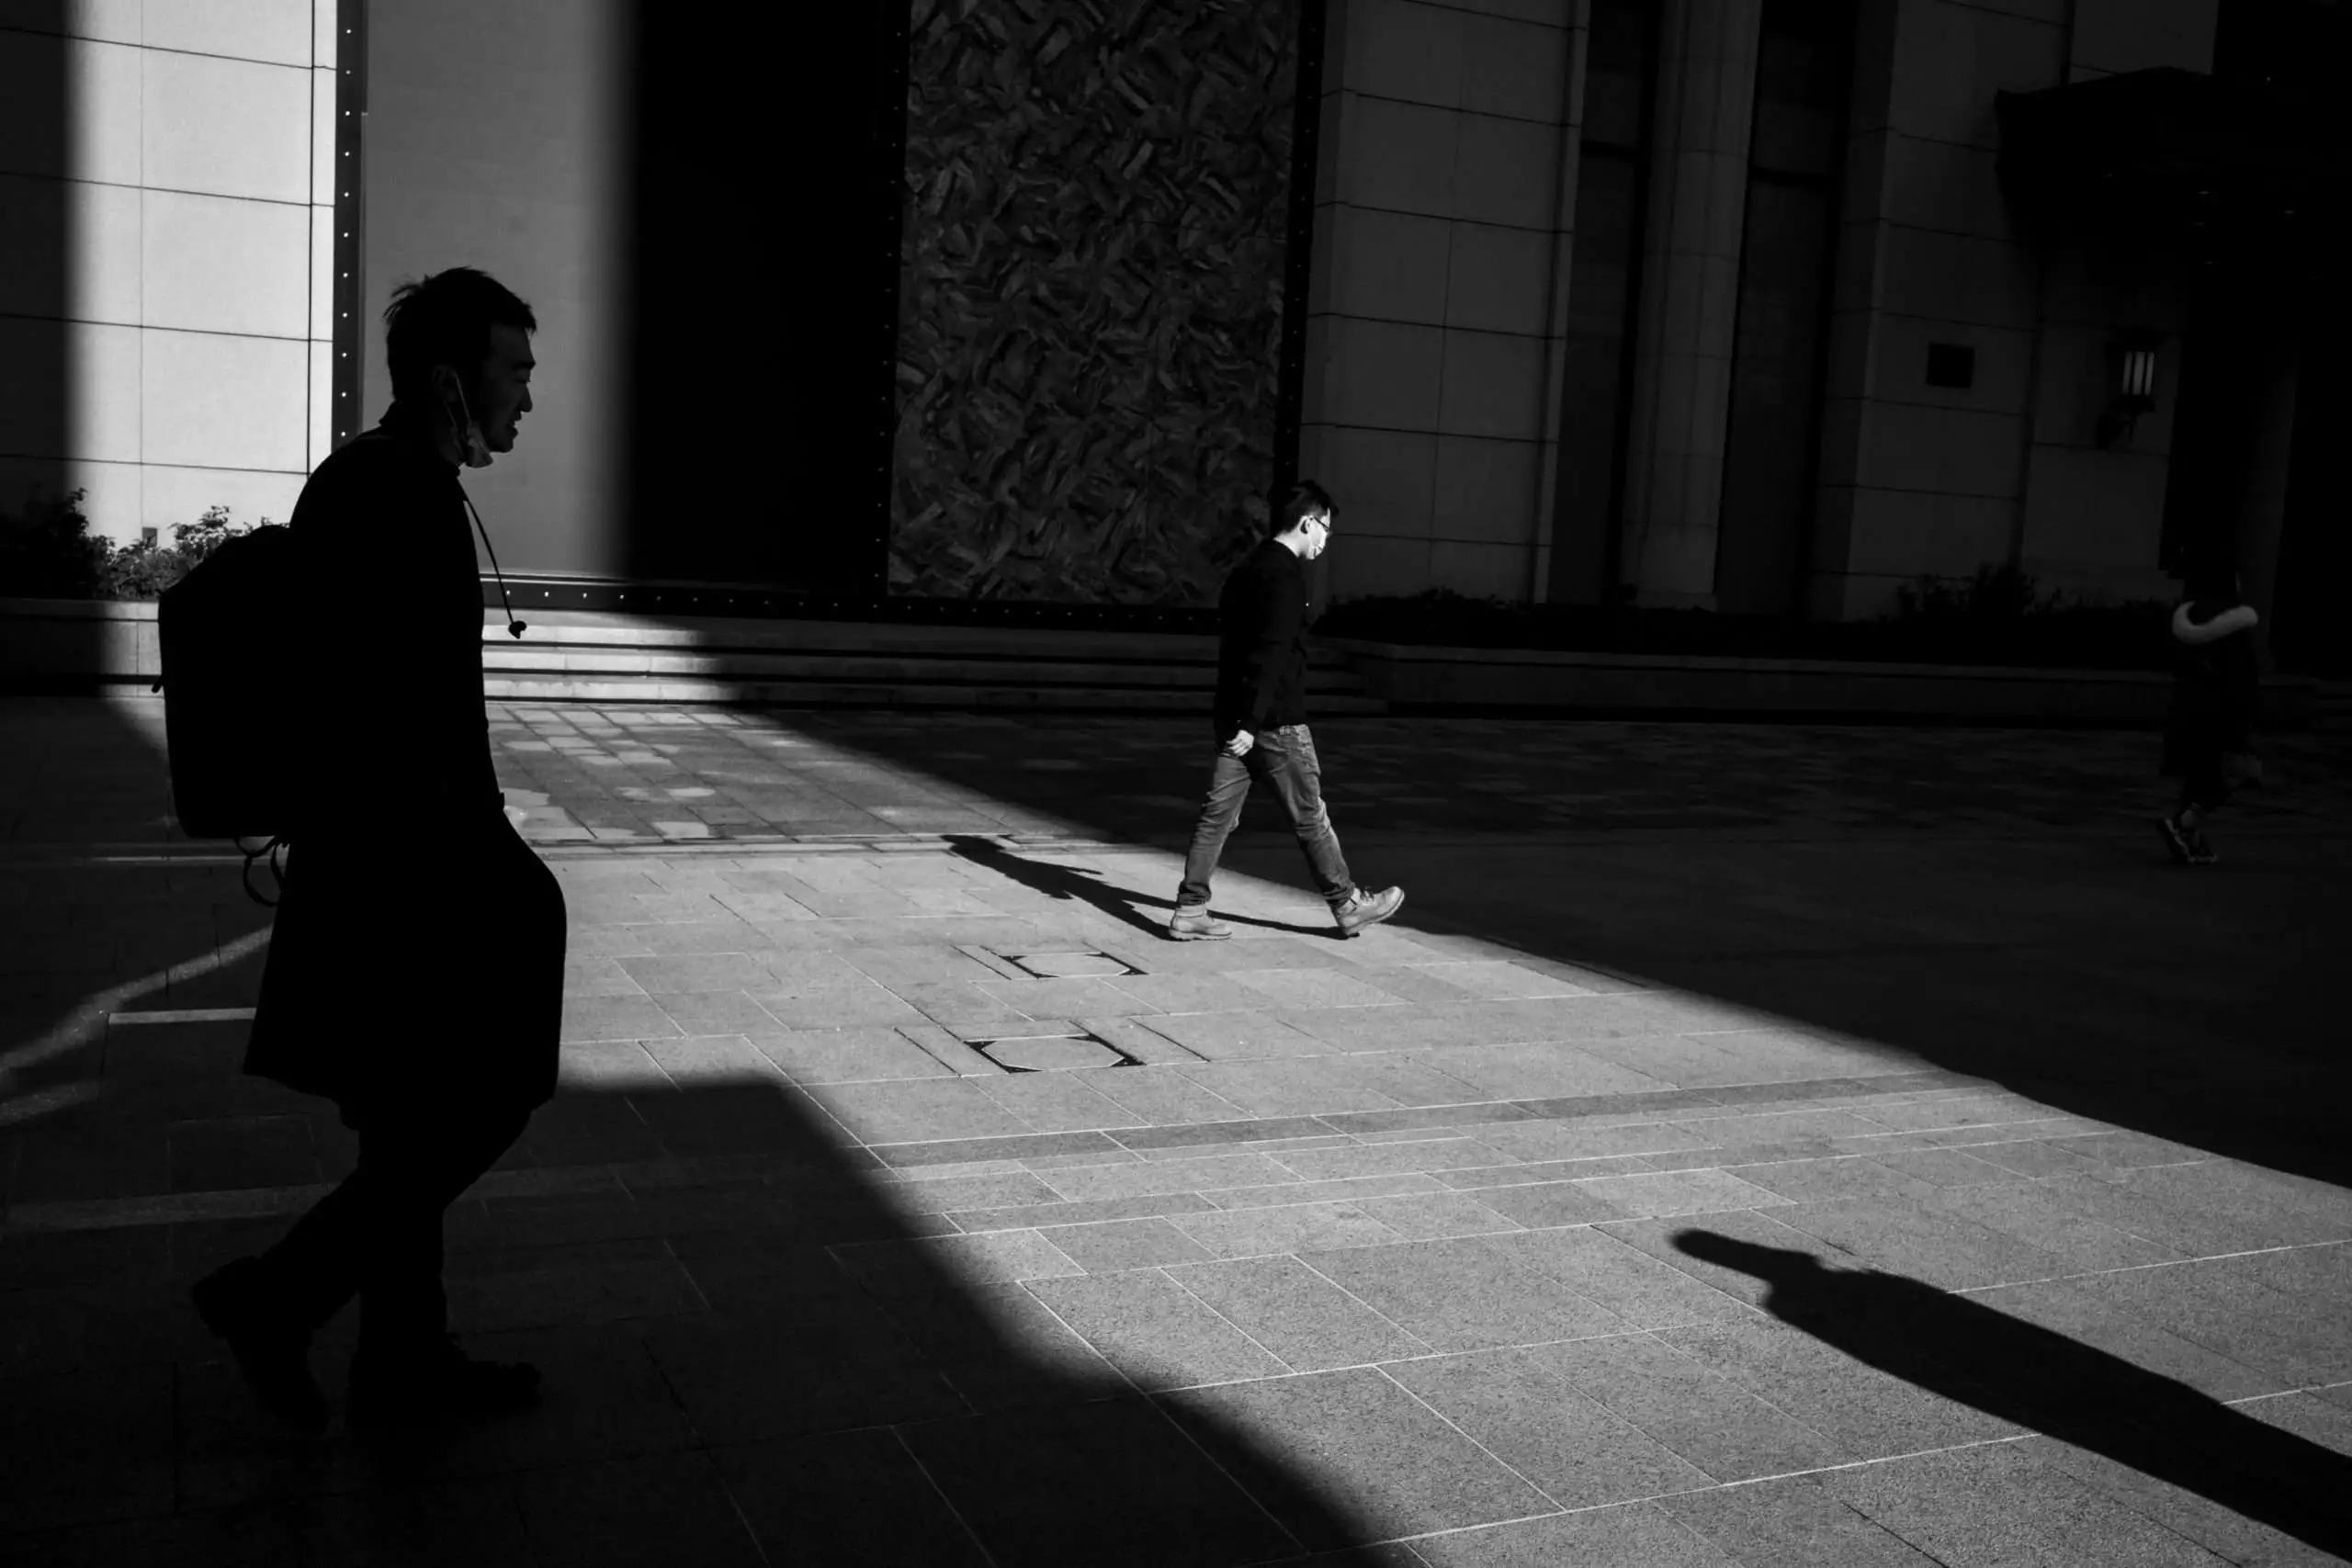 This image is one of the classic examples of street photography